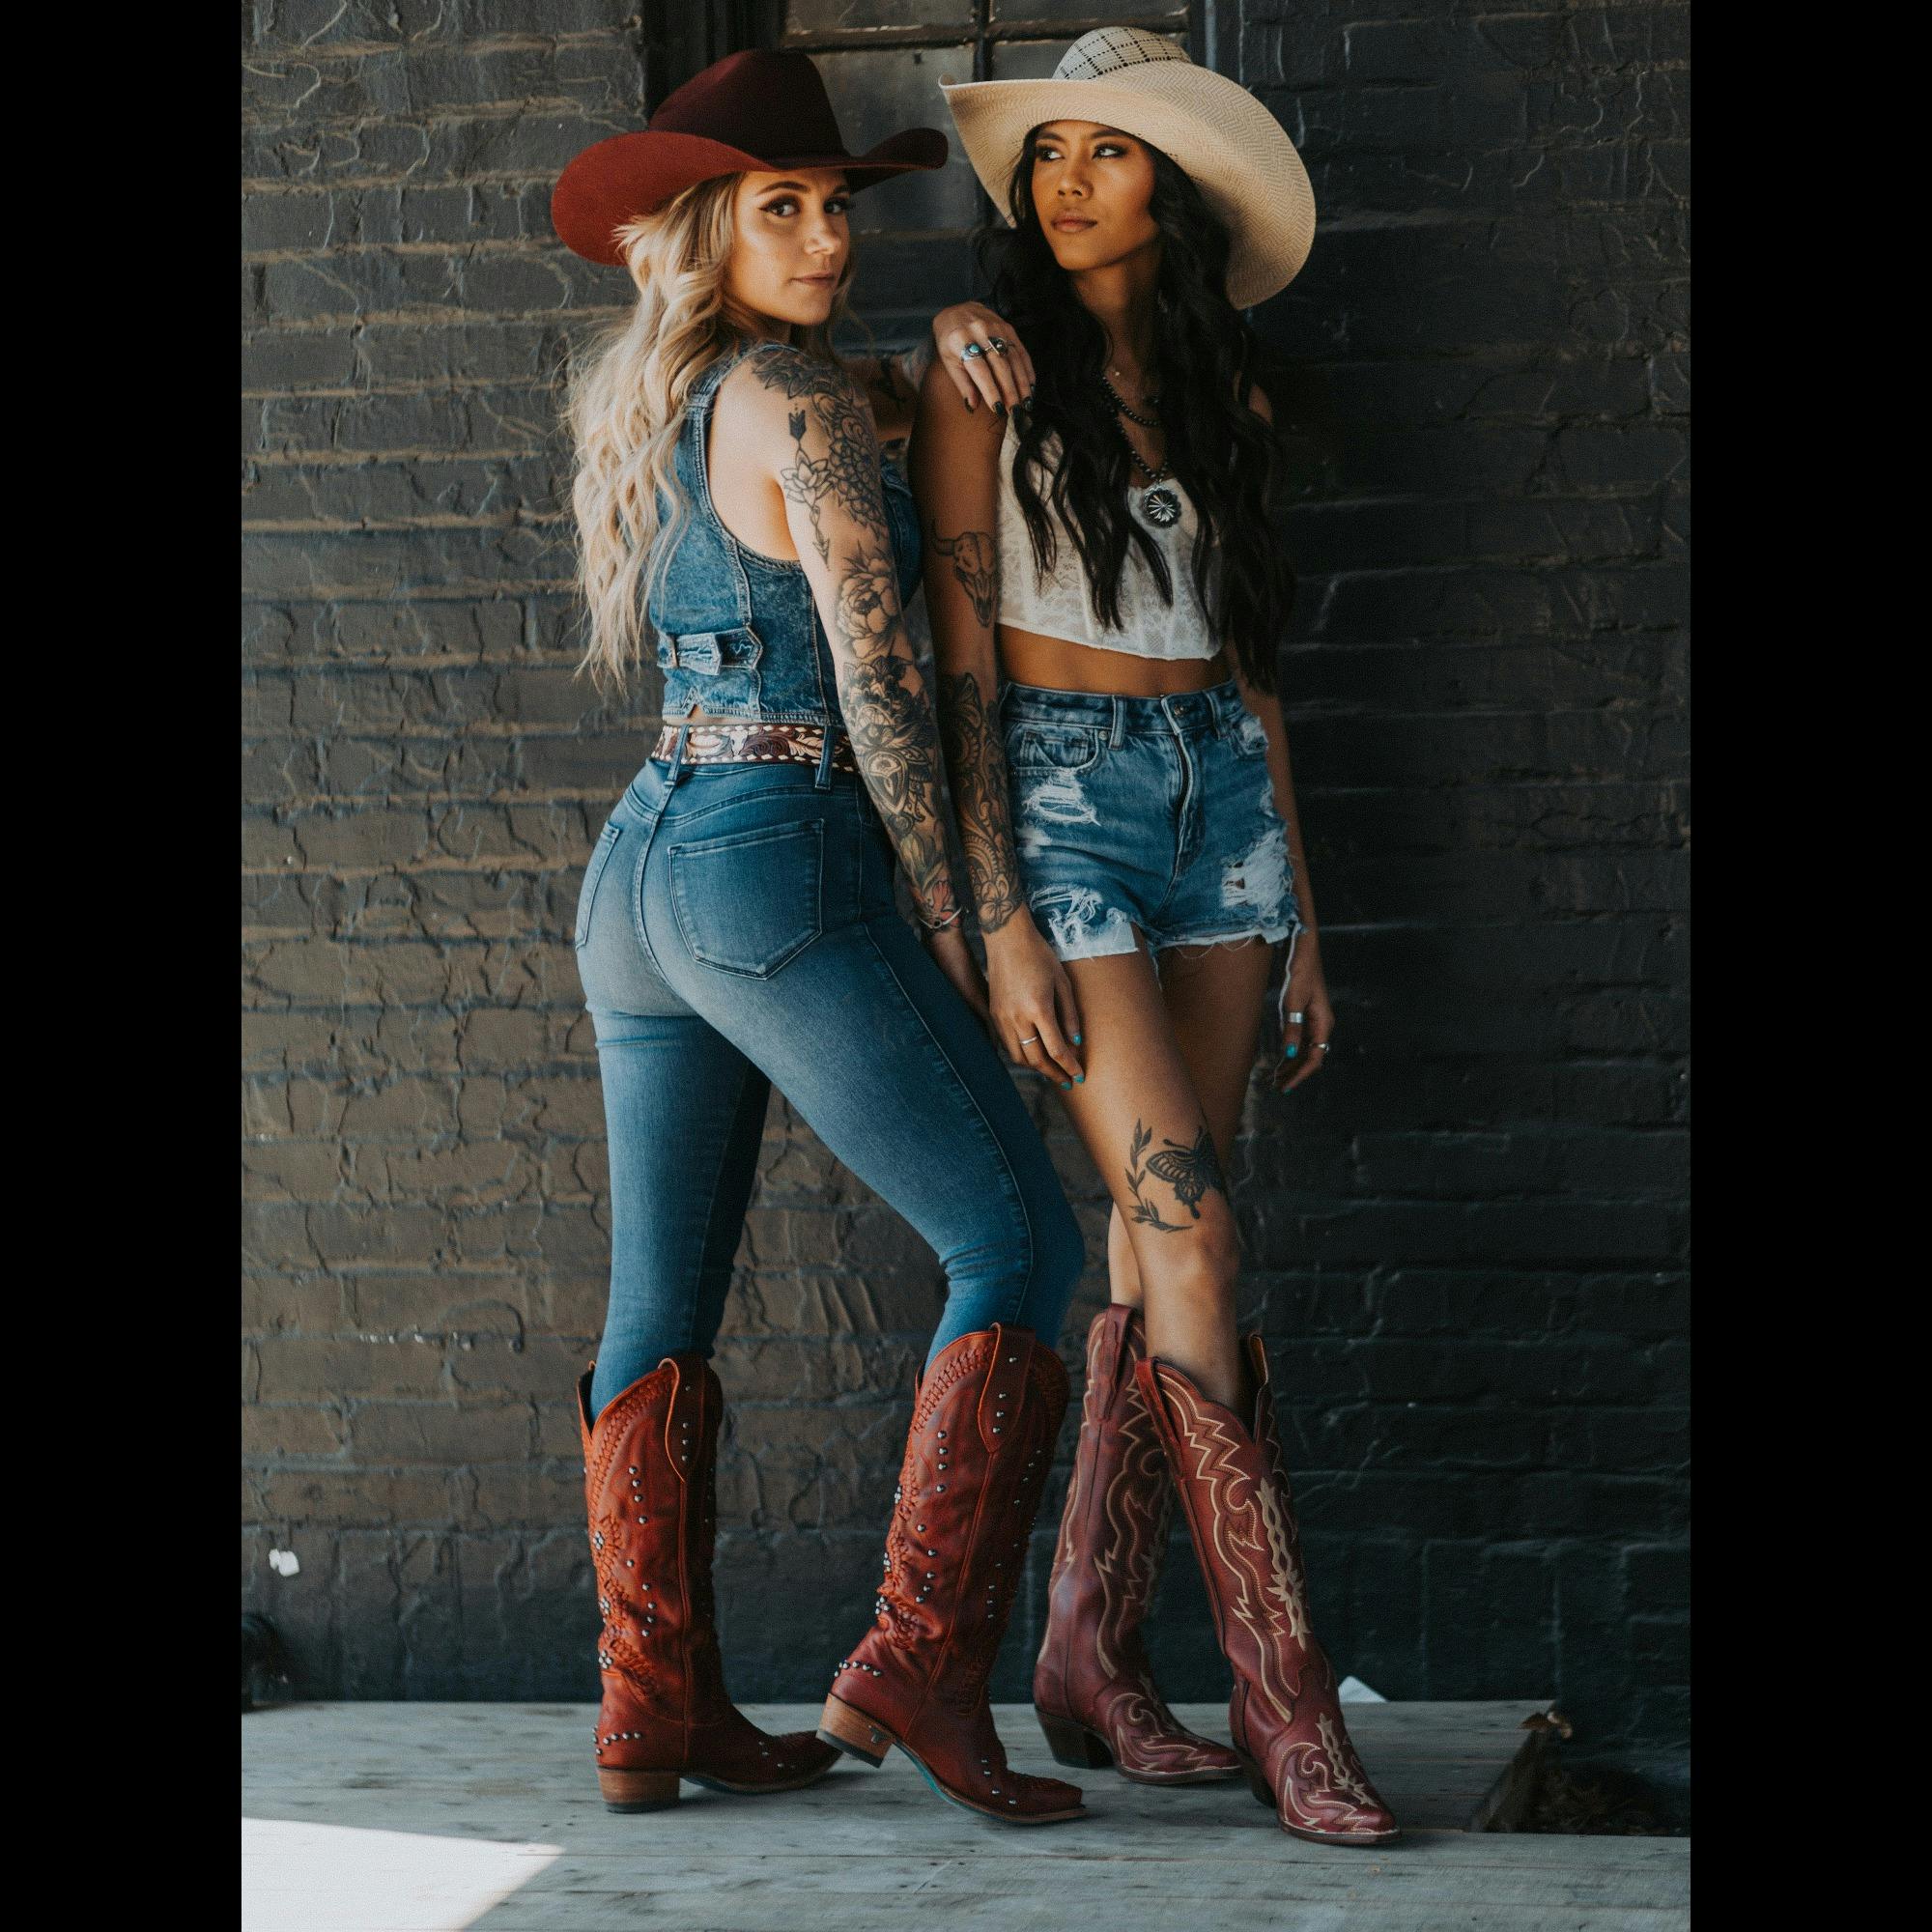 Glam Cowboy and Cowgirl Models Image #24